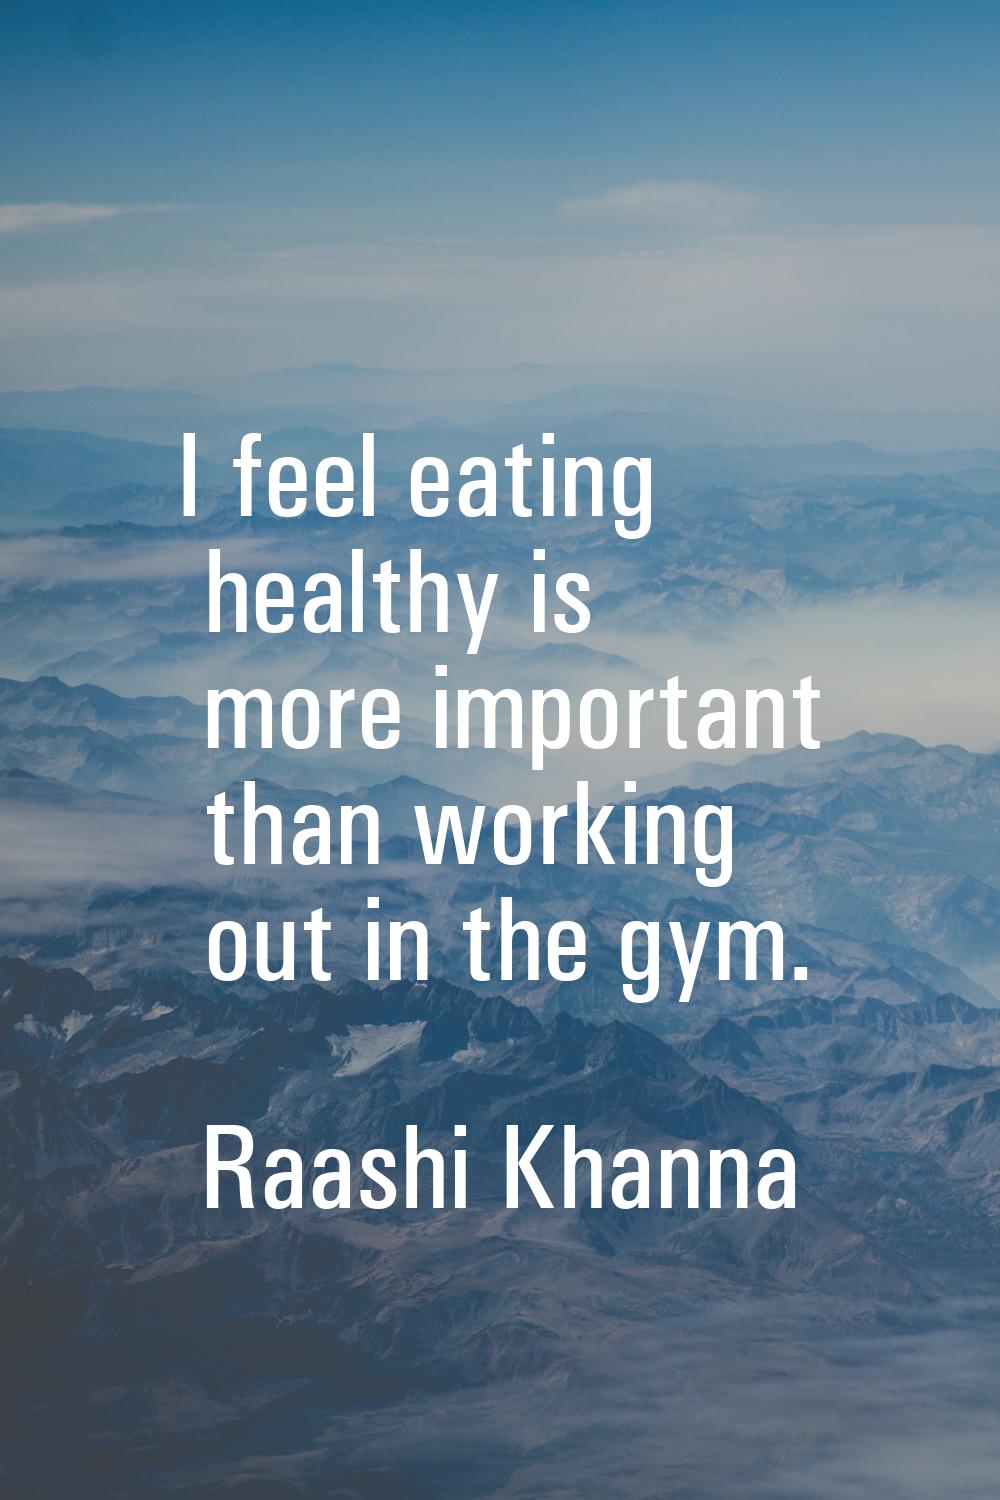 I feel eating healthy is more important than working out in the gym.